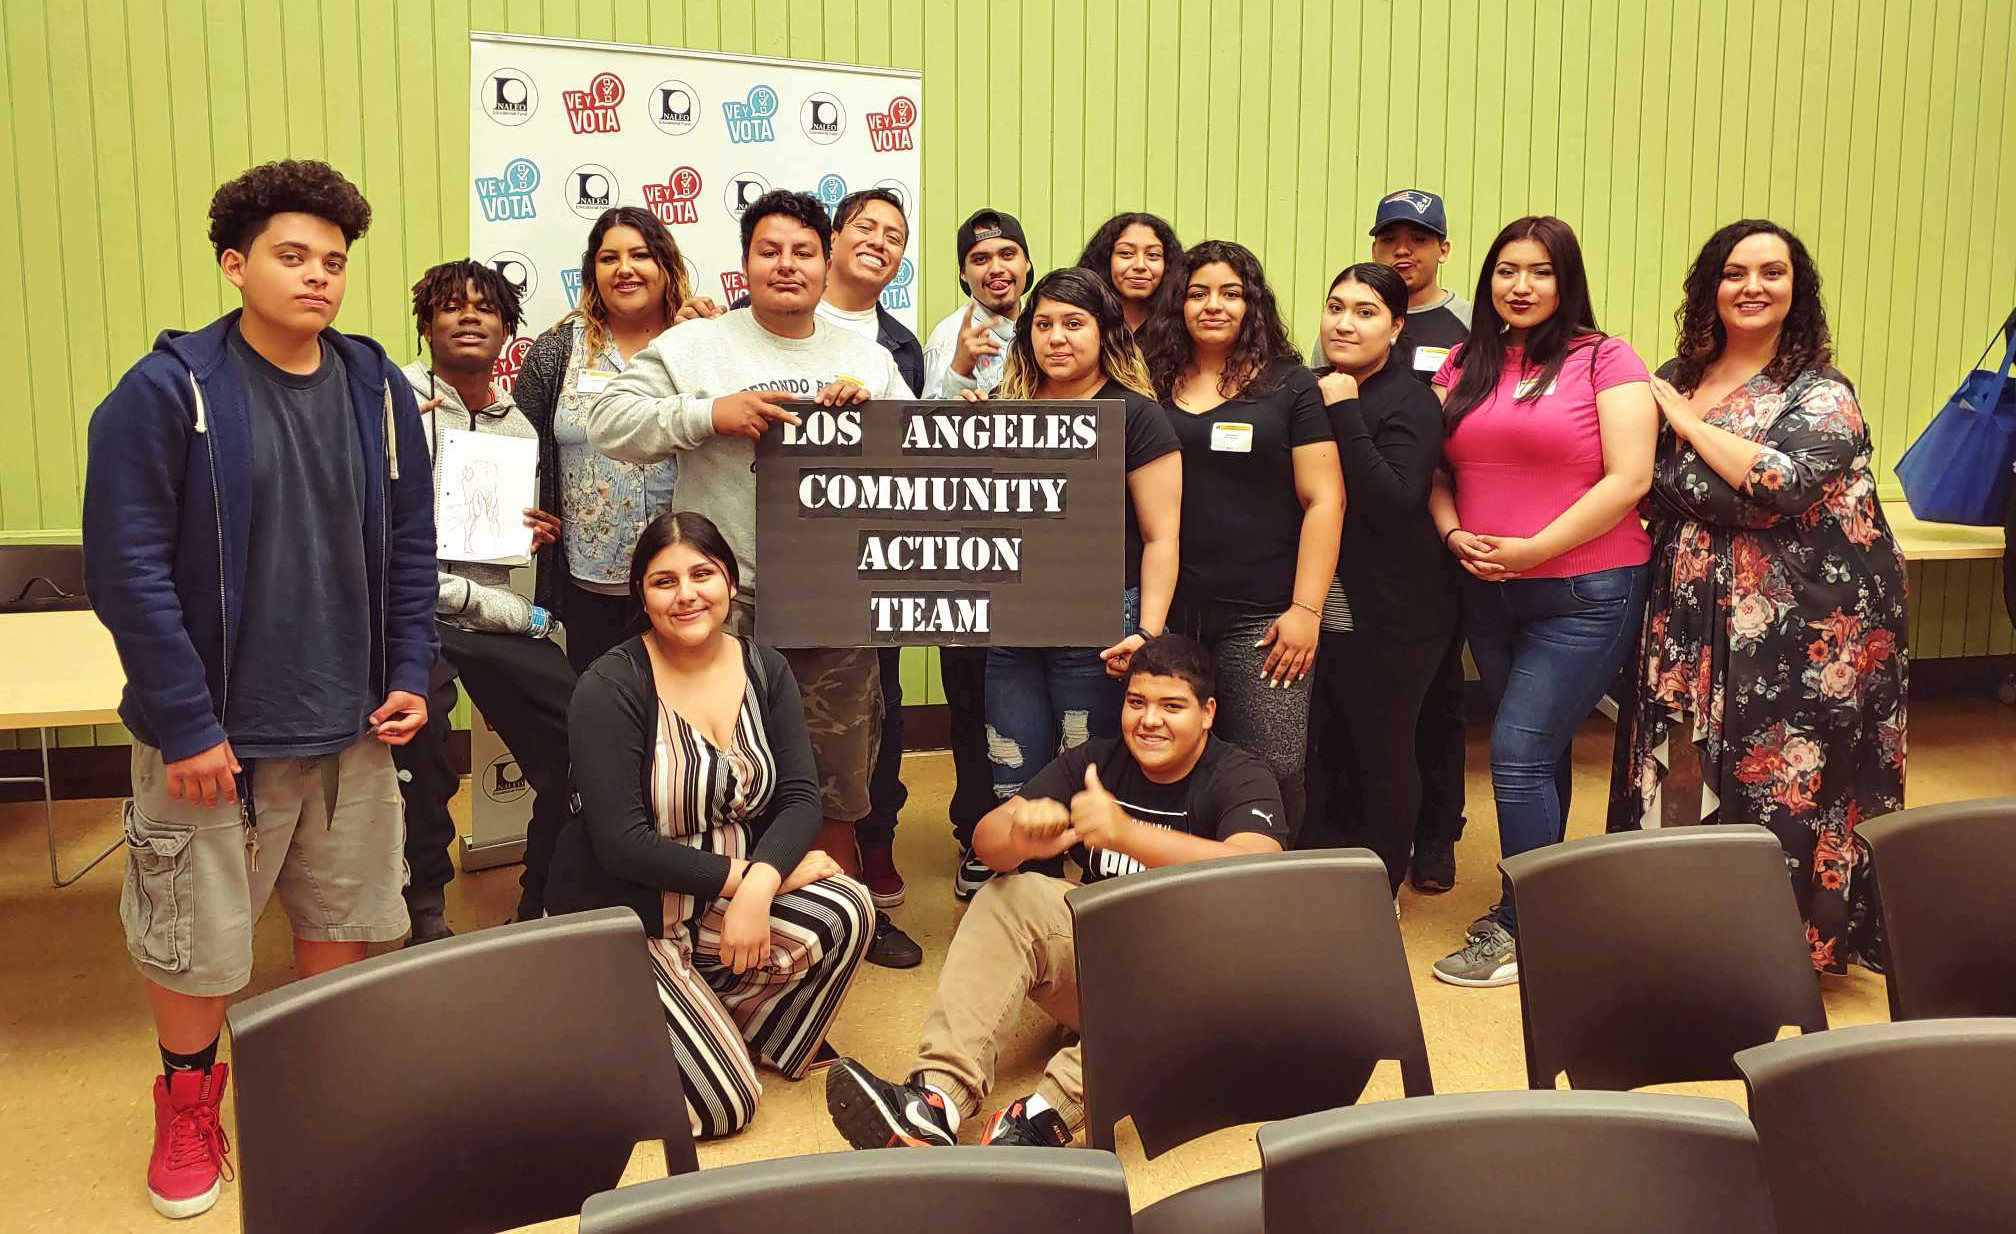 Group photo of the Los Angeles youth team